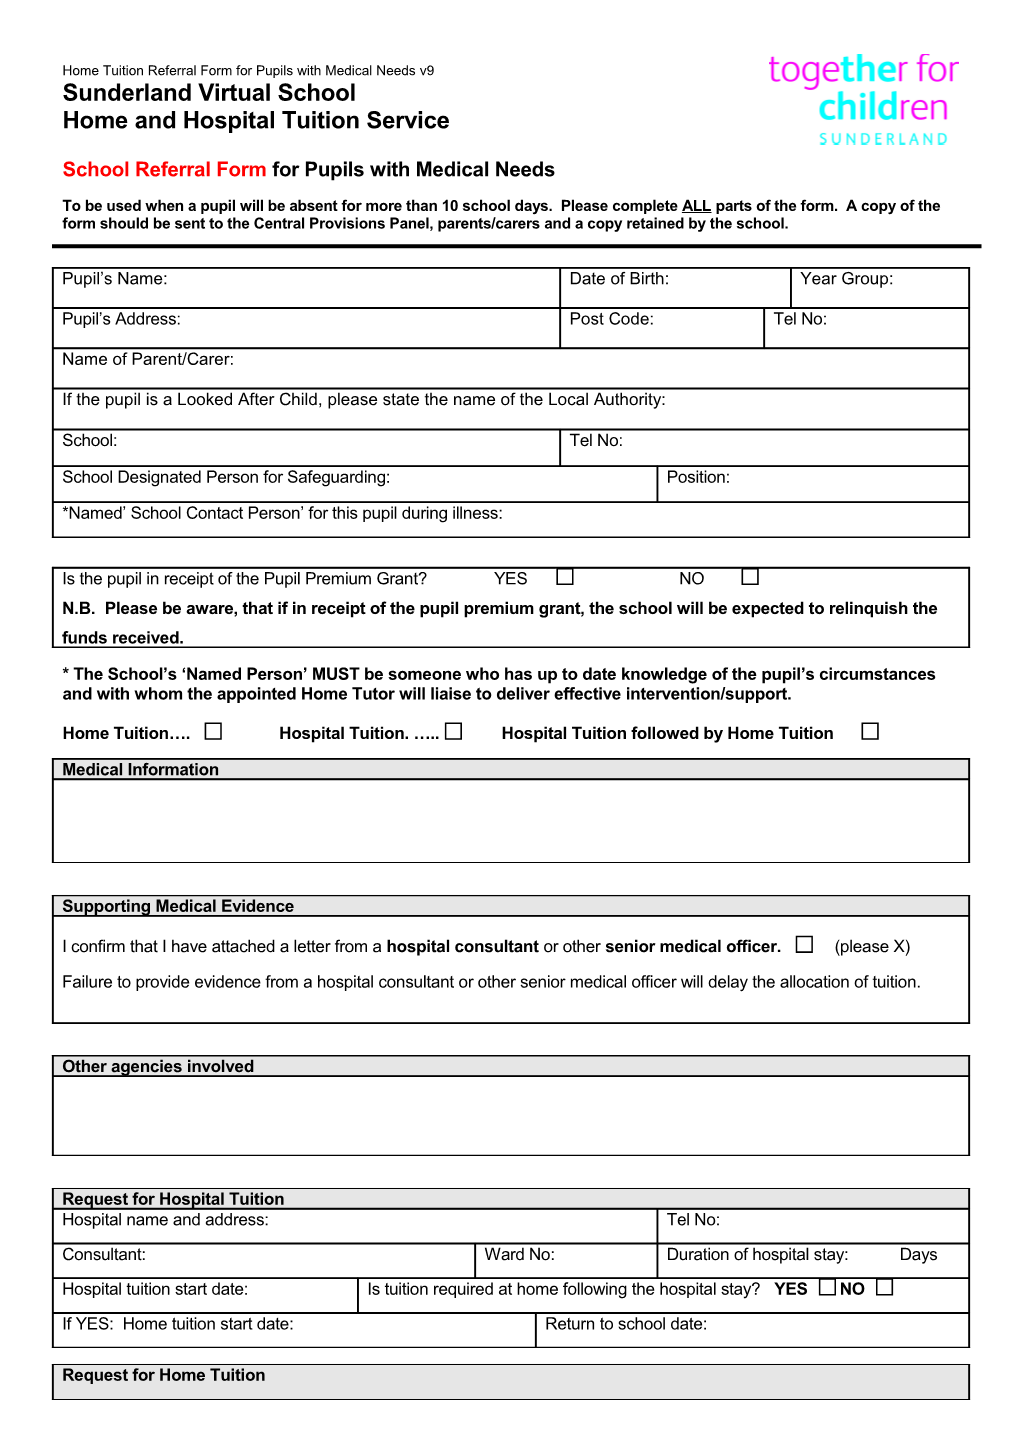 Home Tuition Referral Form for Pupils with Medical Needs V9